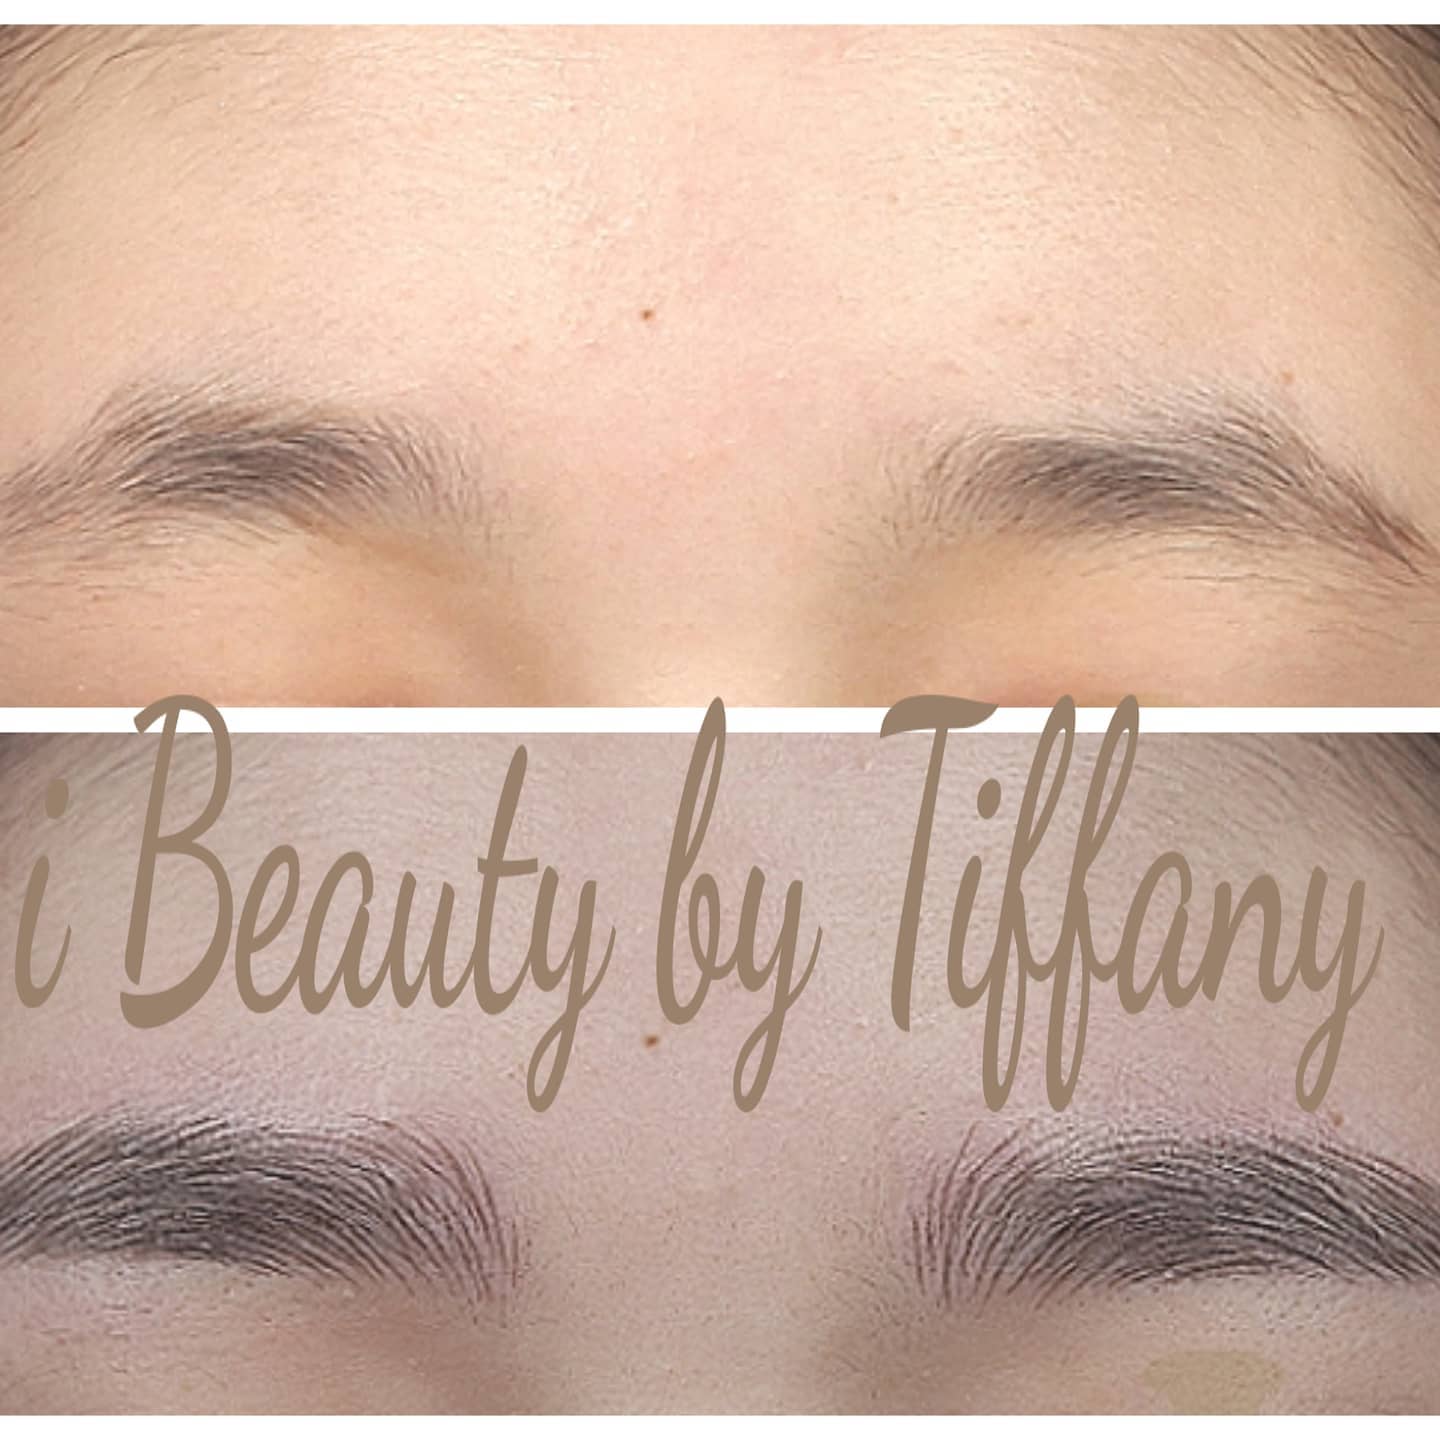 I Beauty by Tiffany Skin Care & Permanent Makeup